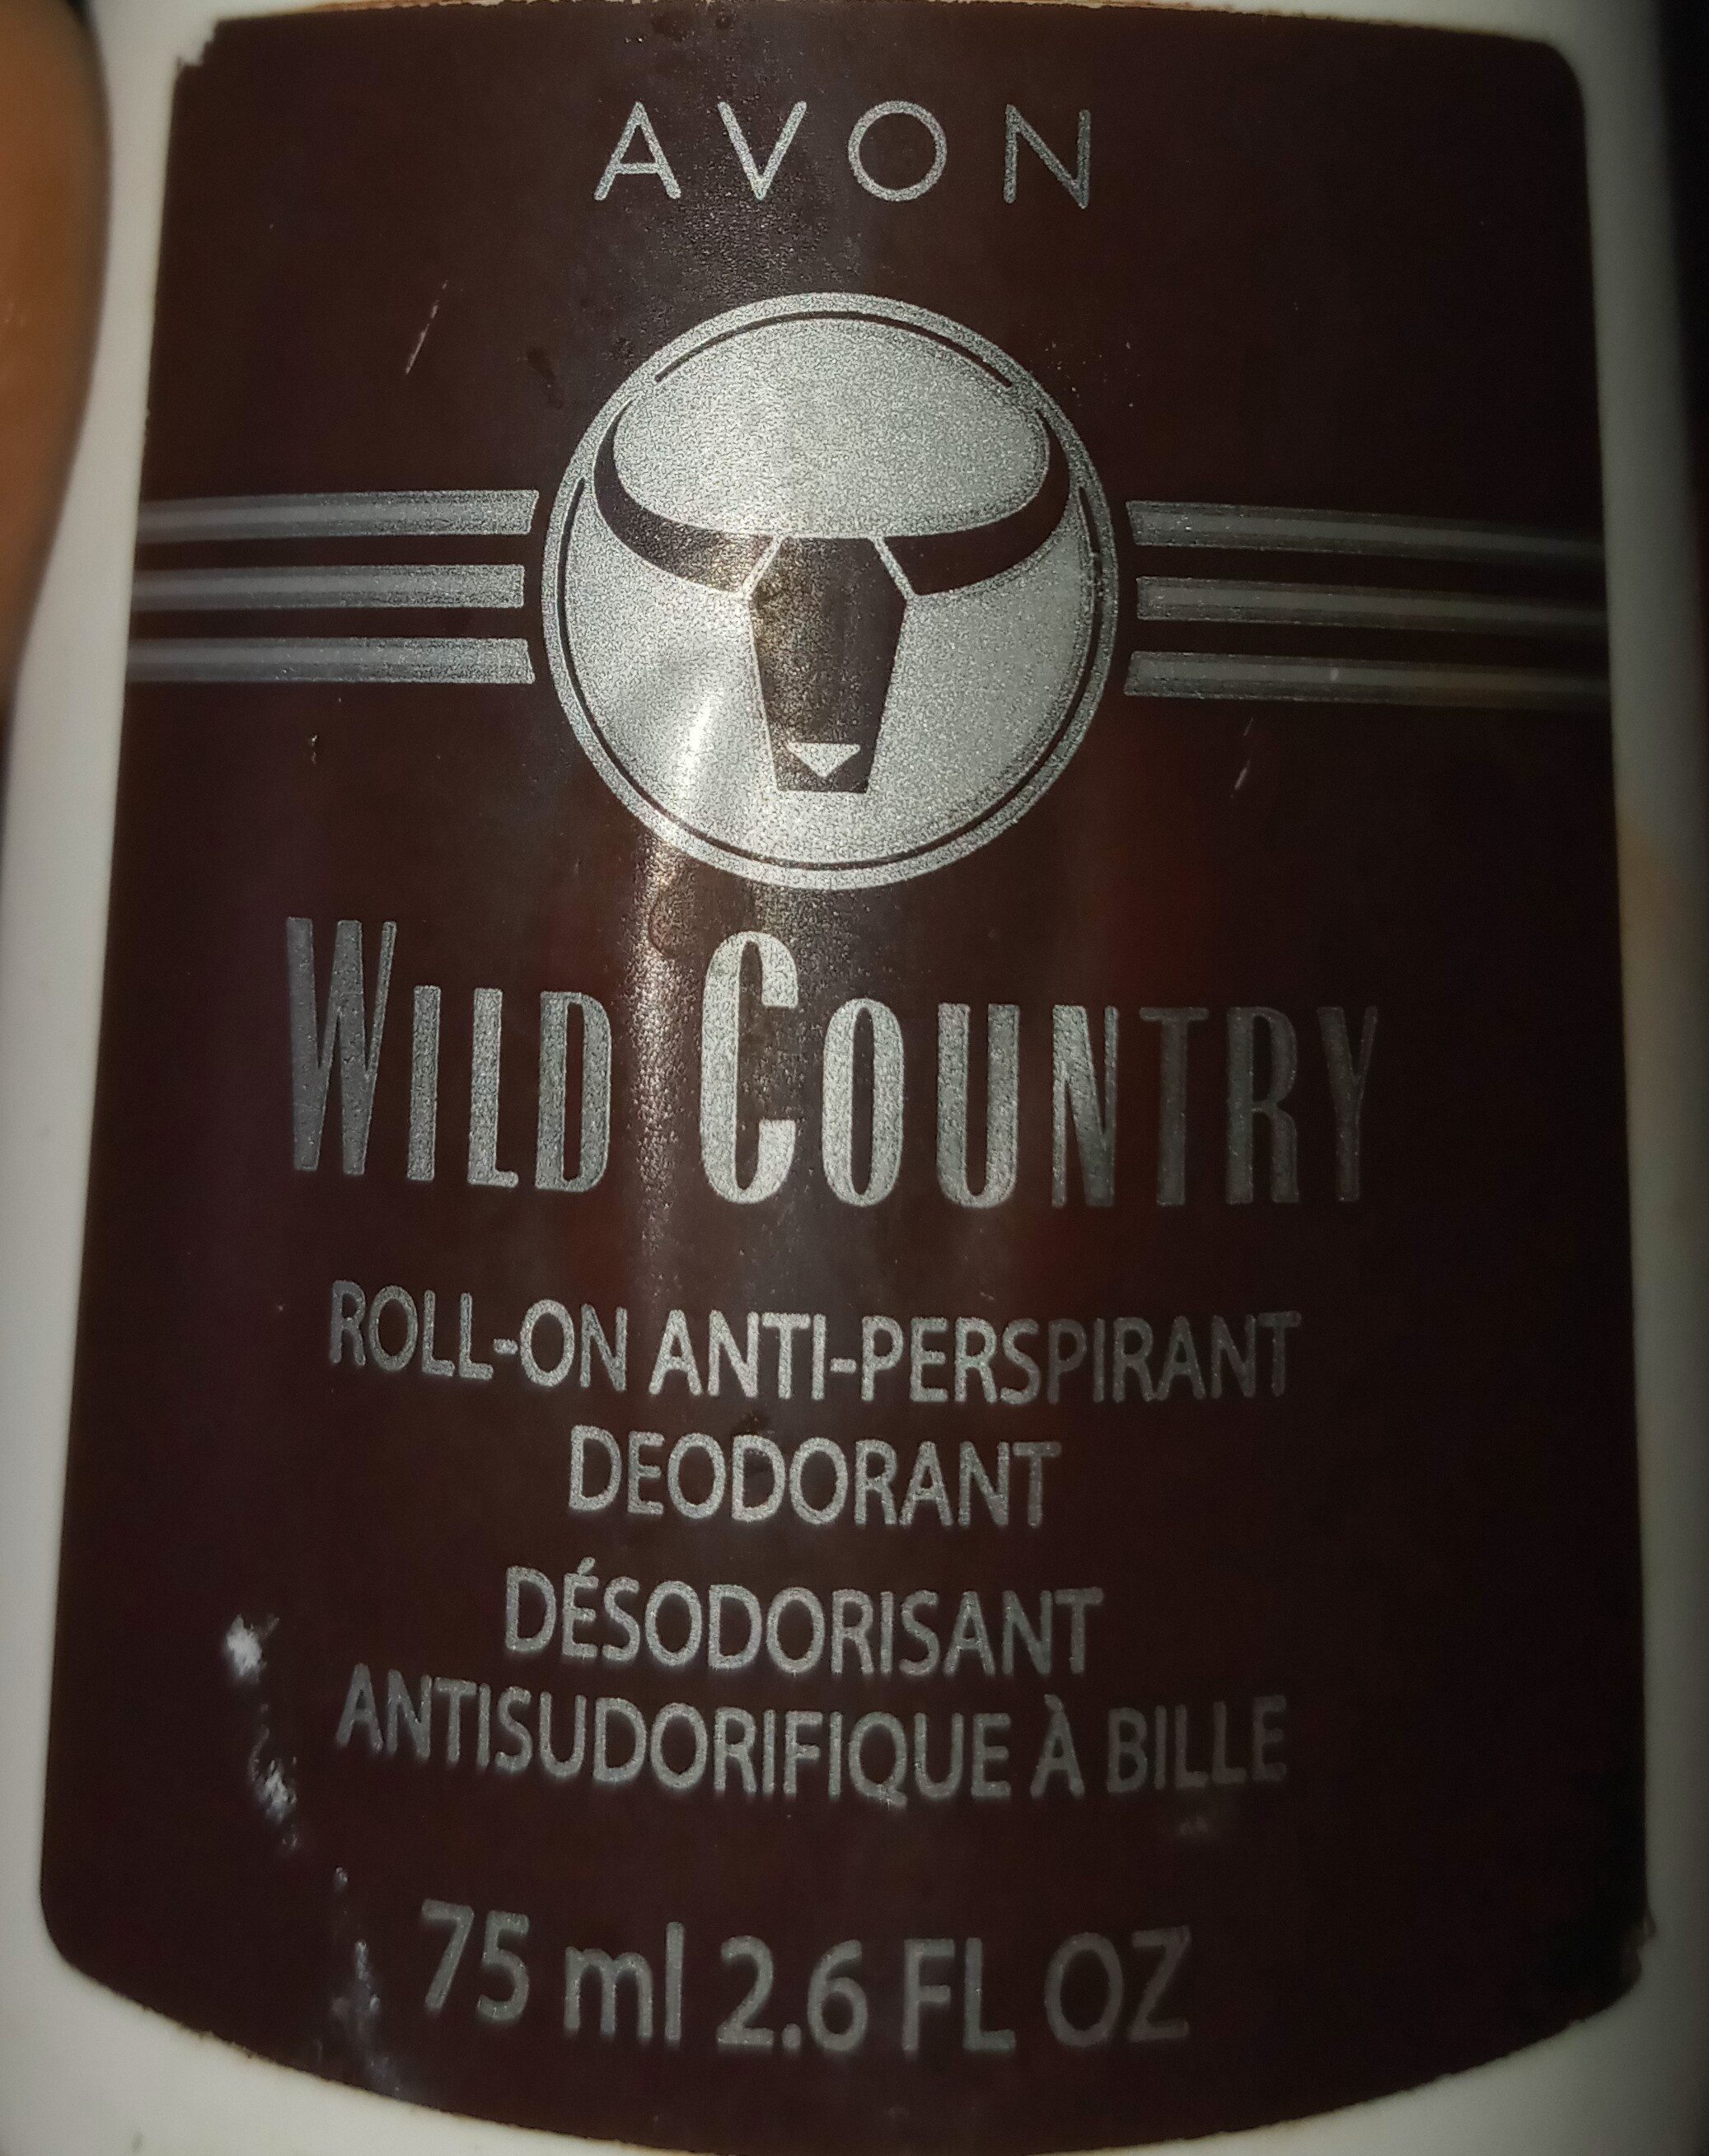 Wild country, roll-on deodorant - Ингредиенты - en